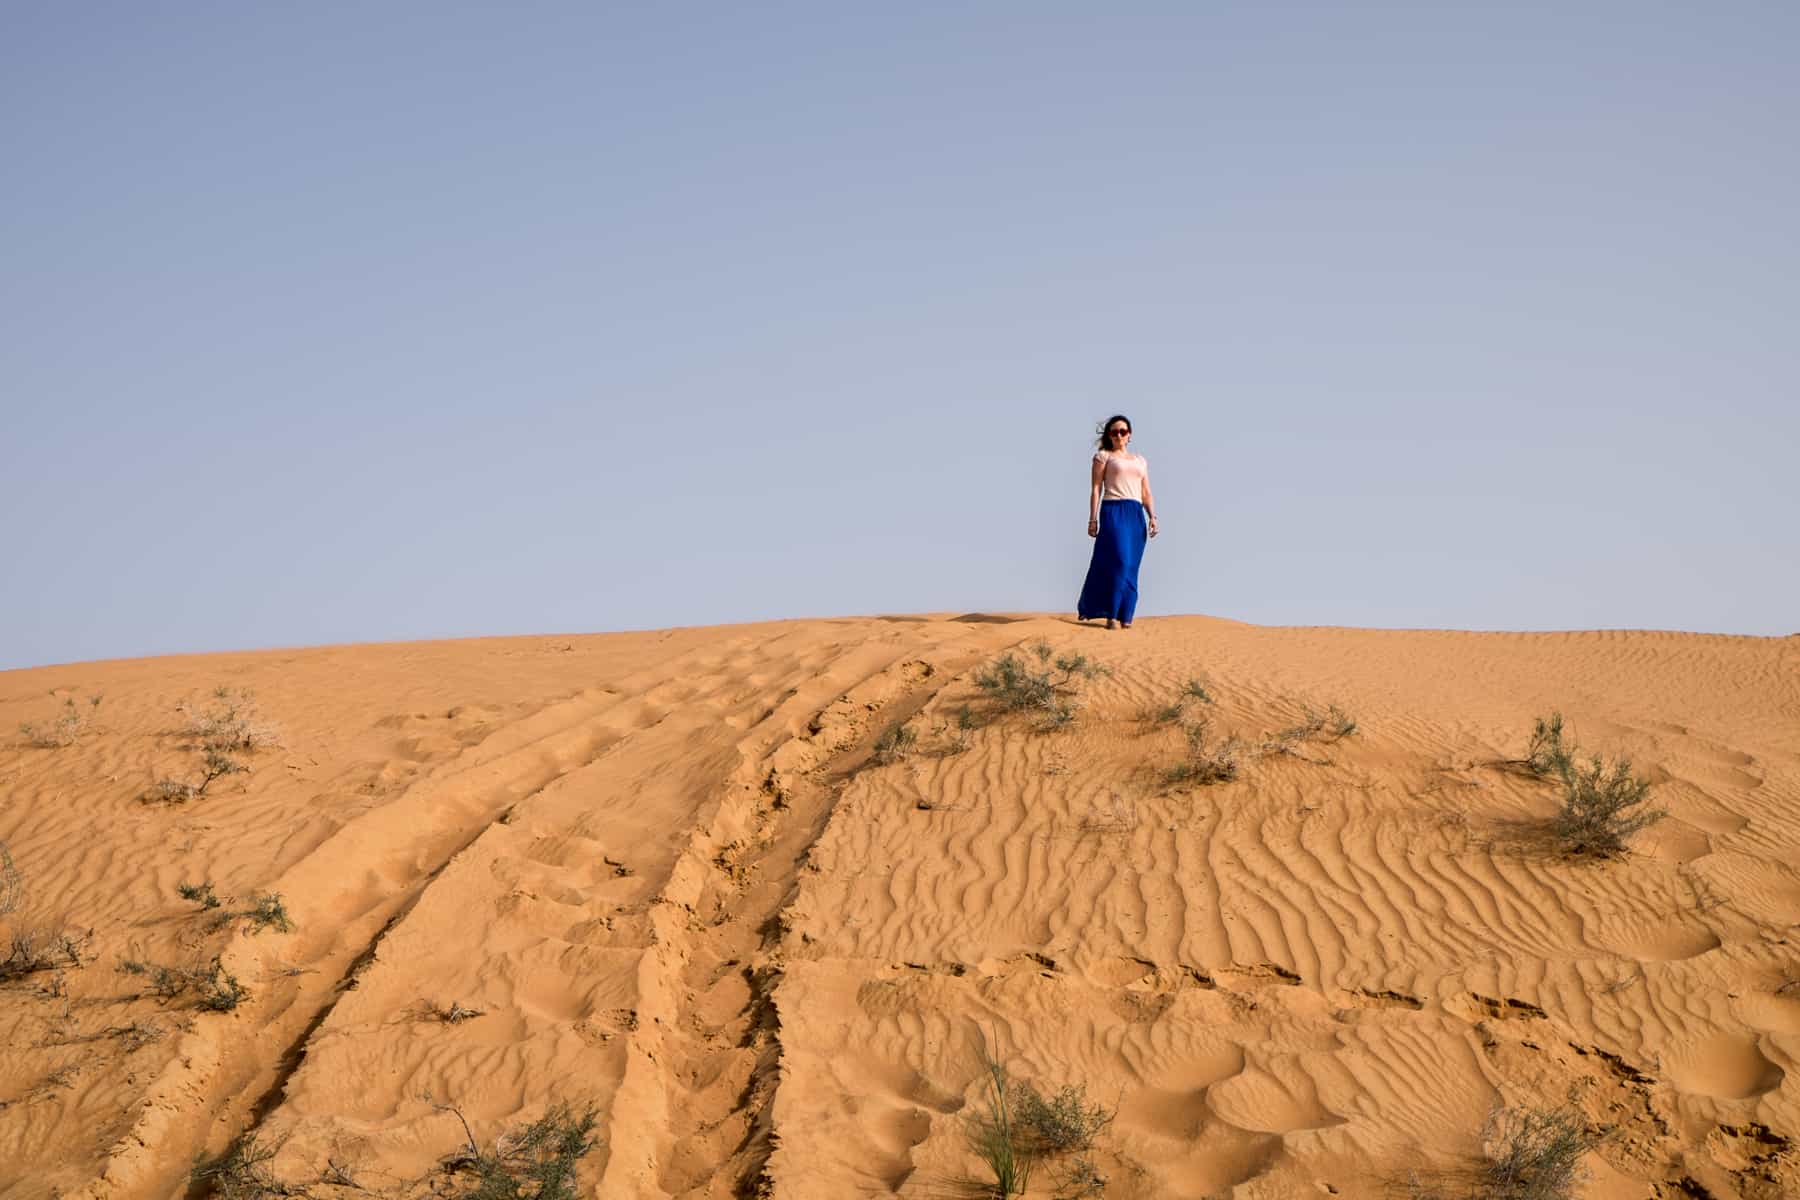 A woman in a pink t-shirt and electric blue skirt stands on top of a golden sand dune in Ras Al Khaimah, under a clear blue sky